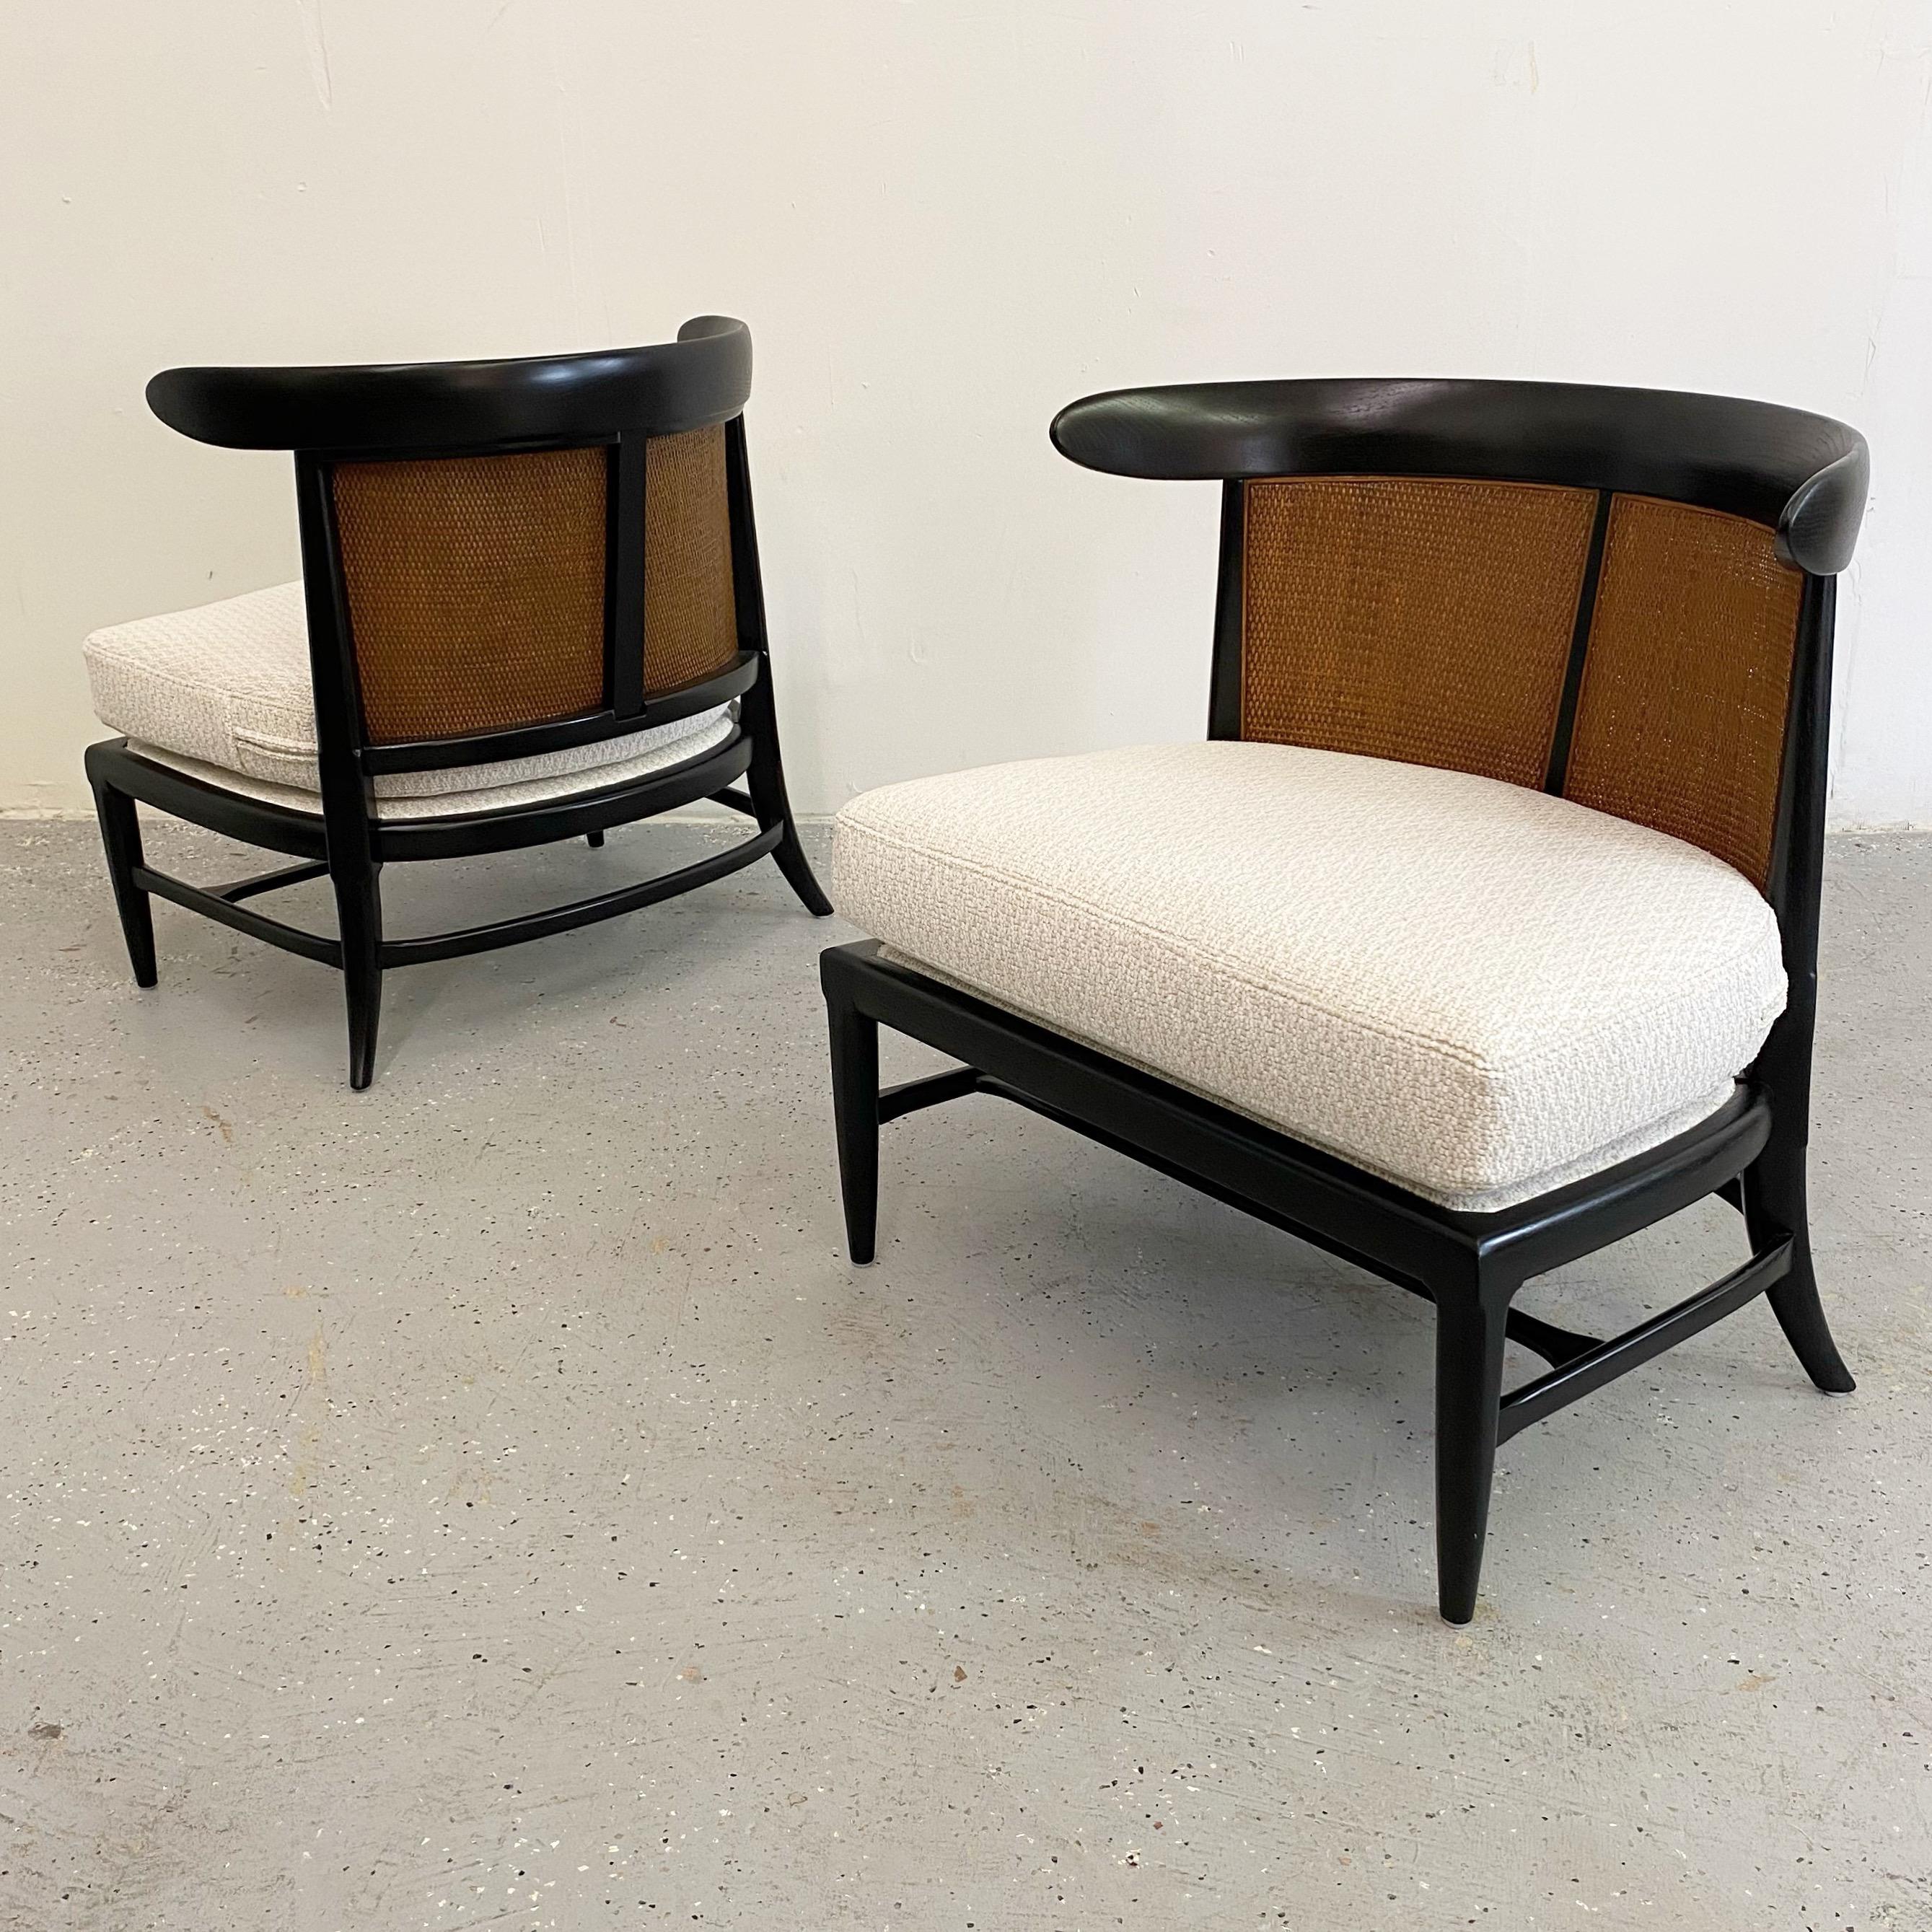 An incredible pair of vintage slipper chairs in excellent restored condition. These have been rejuvenated with a satin black lacquer to contrast the original cane. New boucle upholstery tops off the sculpted frames. A beautiful vintage pair ready to